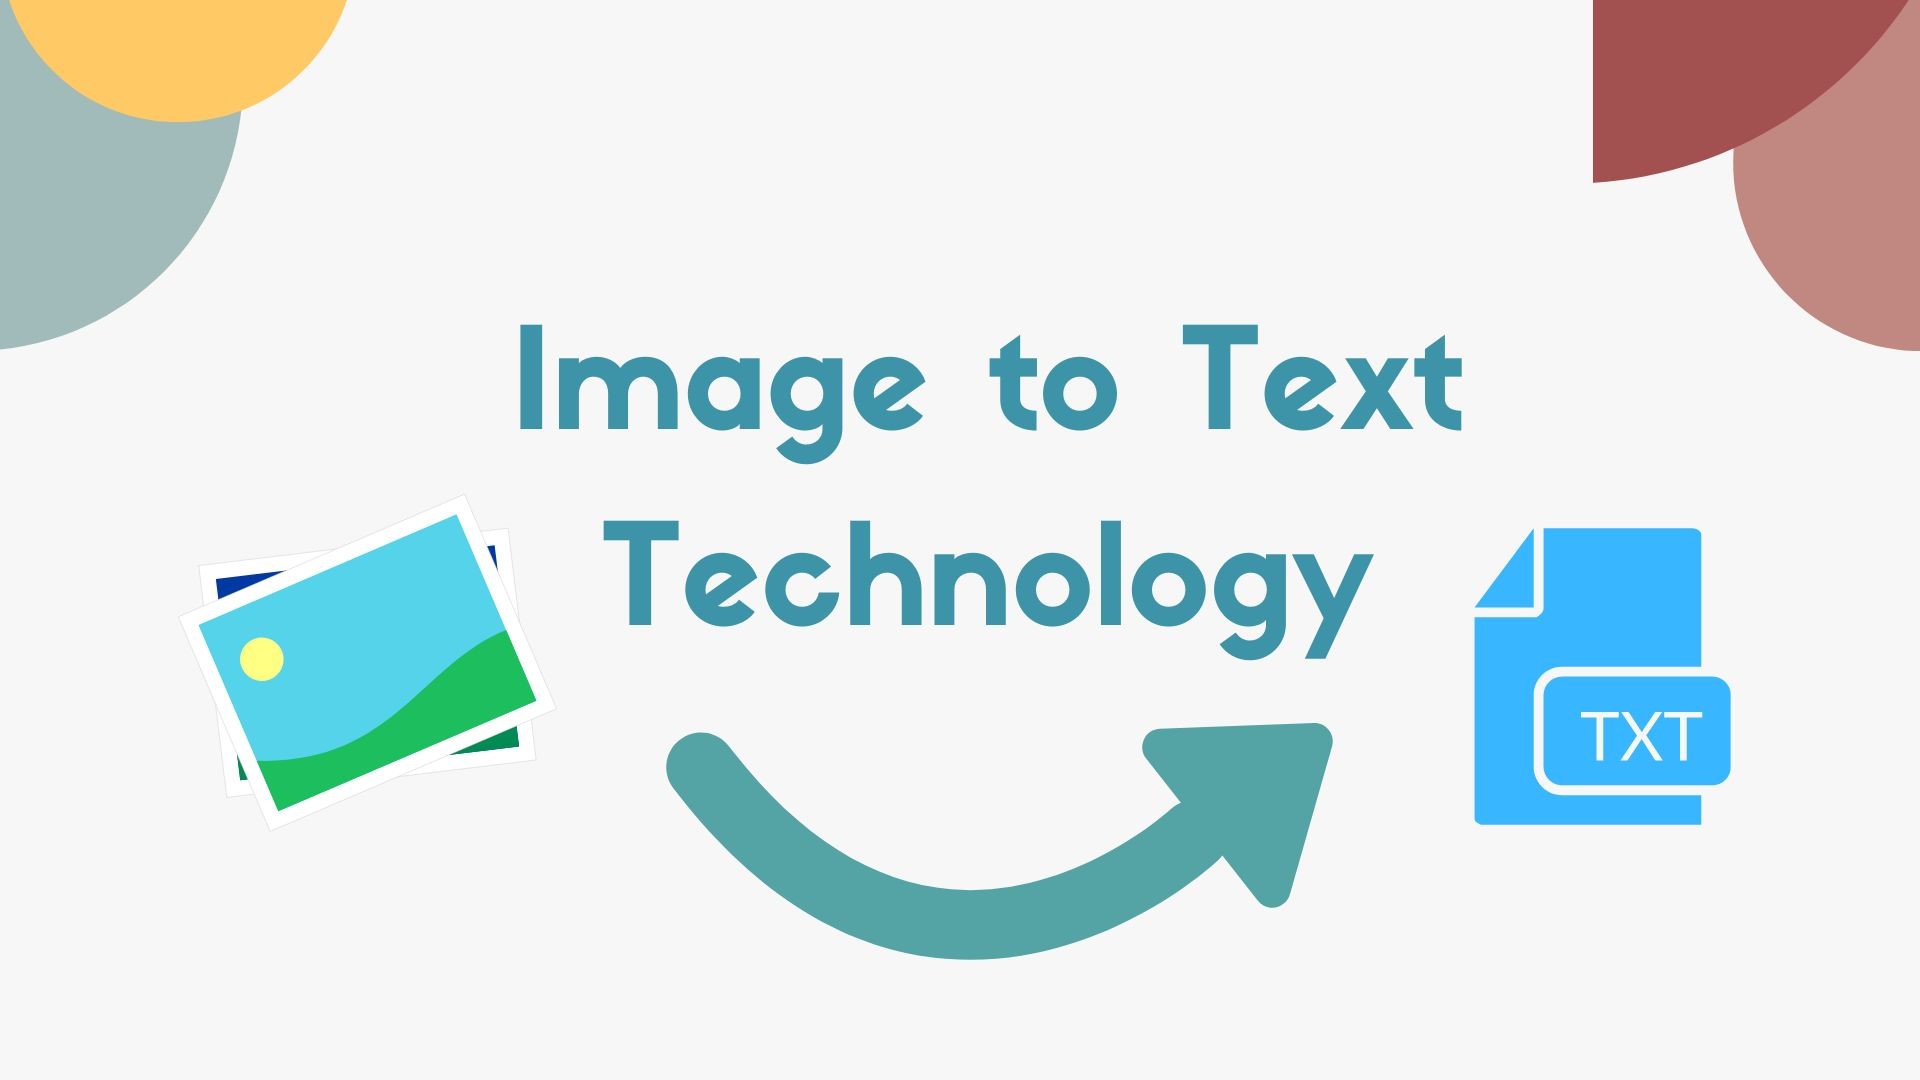 Image to Text Technology